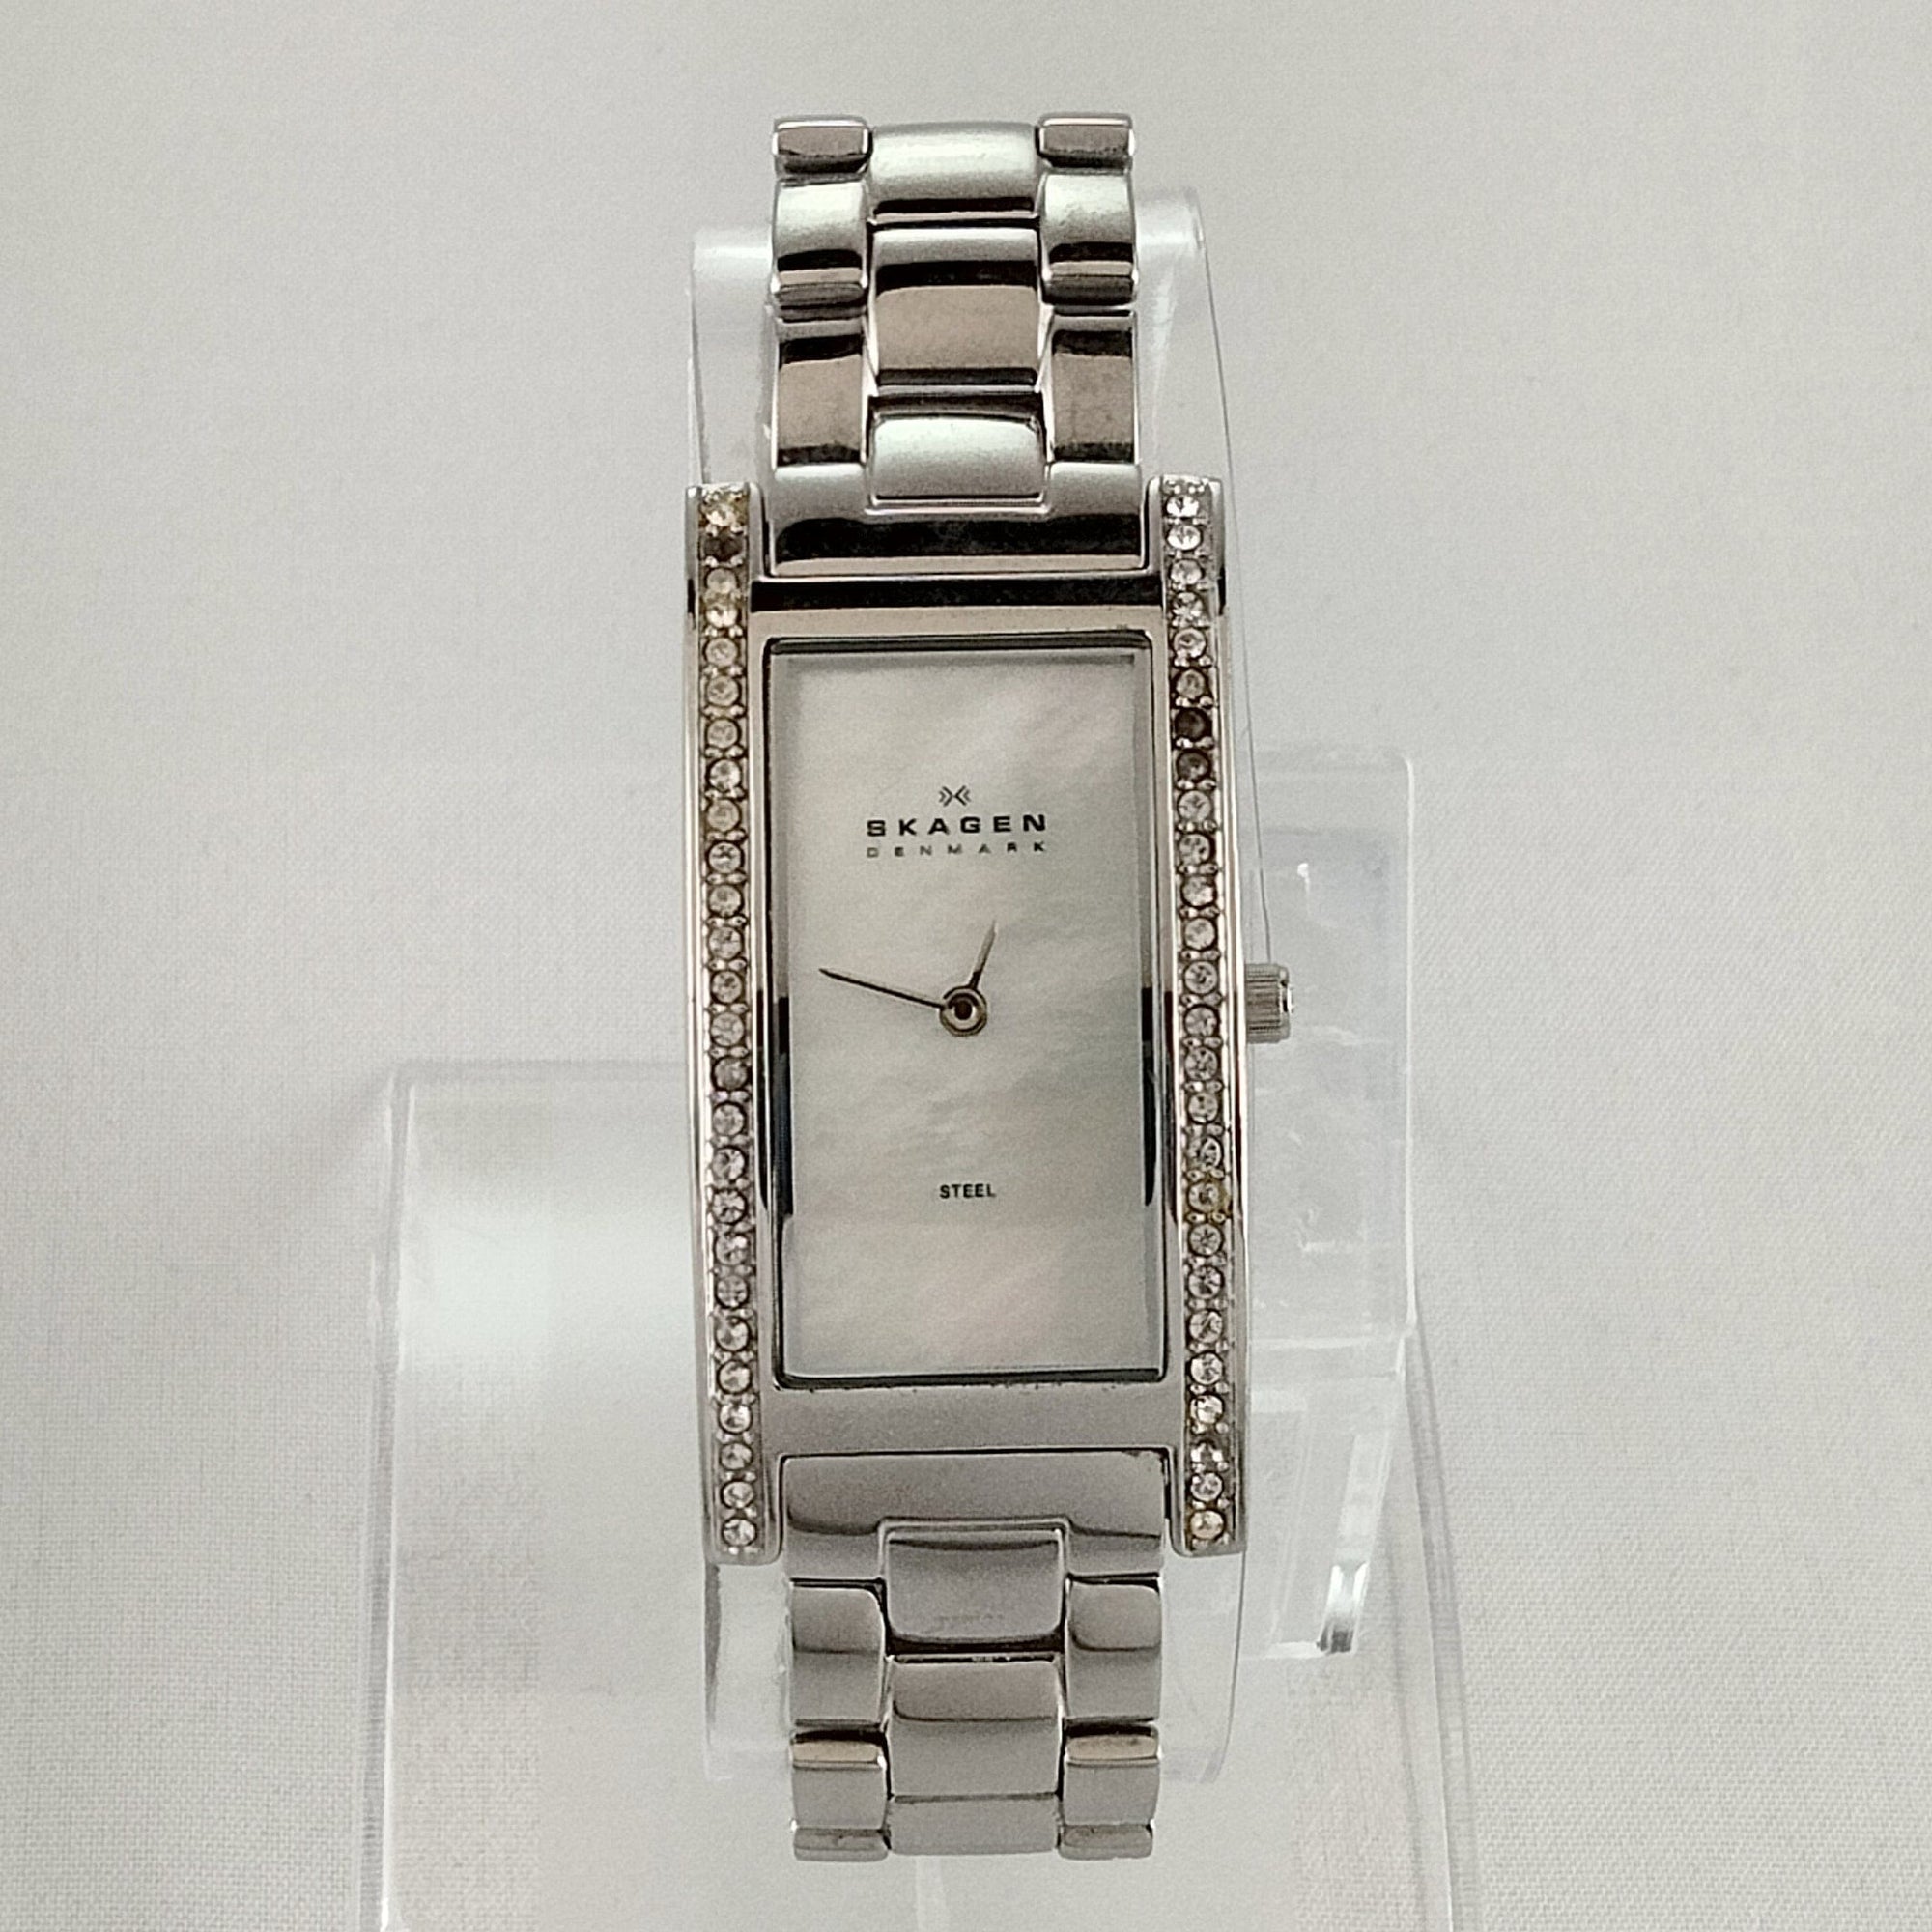 I Like Mikes Mid Century Modern Watches Skagen Women's Stainless Steel Watch, Mother of Pearl Rectangular Dial, Jewel Details, Link Bracelet